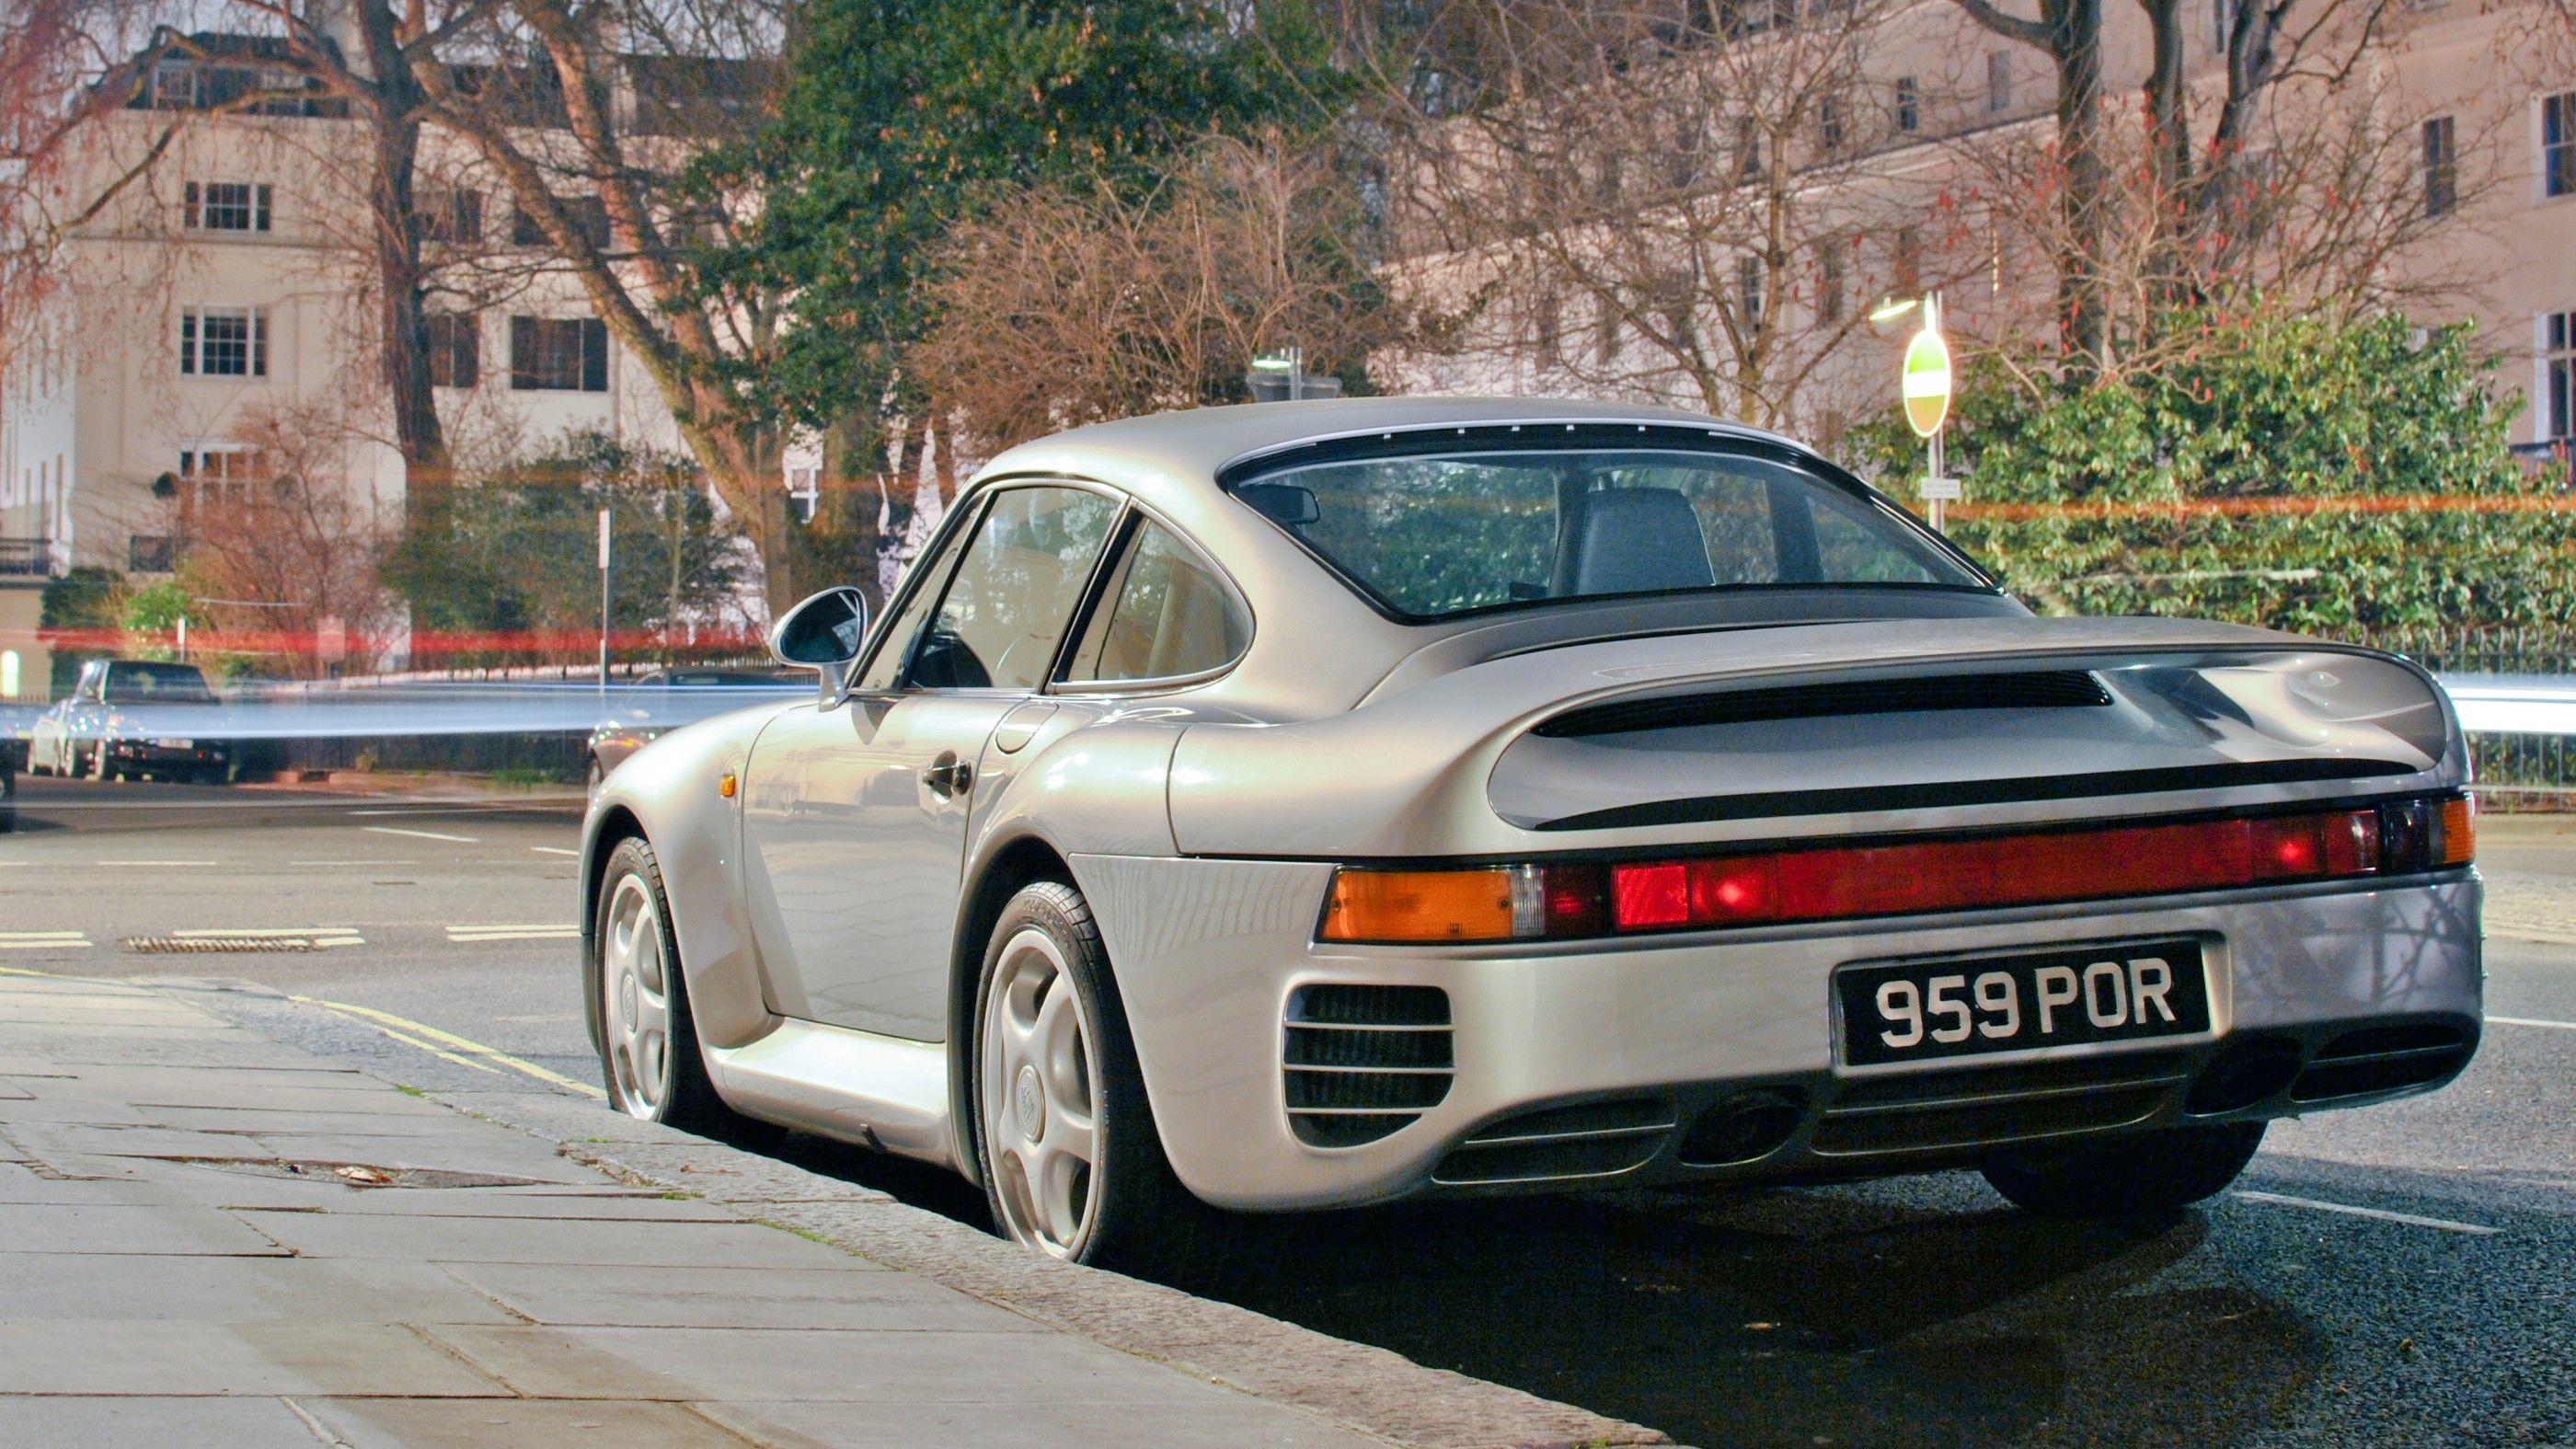 1983 Porsche 959 owned by Jerry Seinfeld 